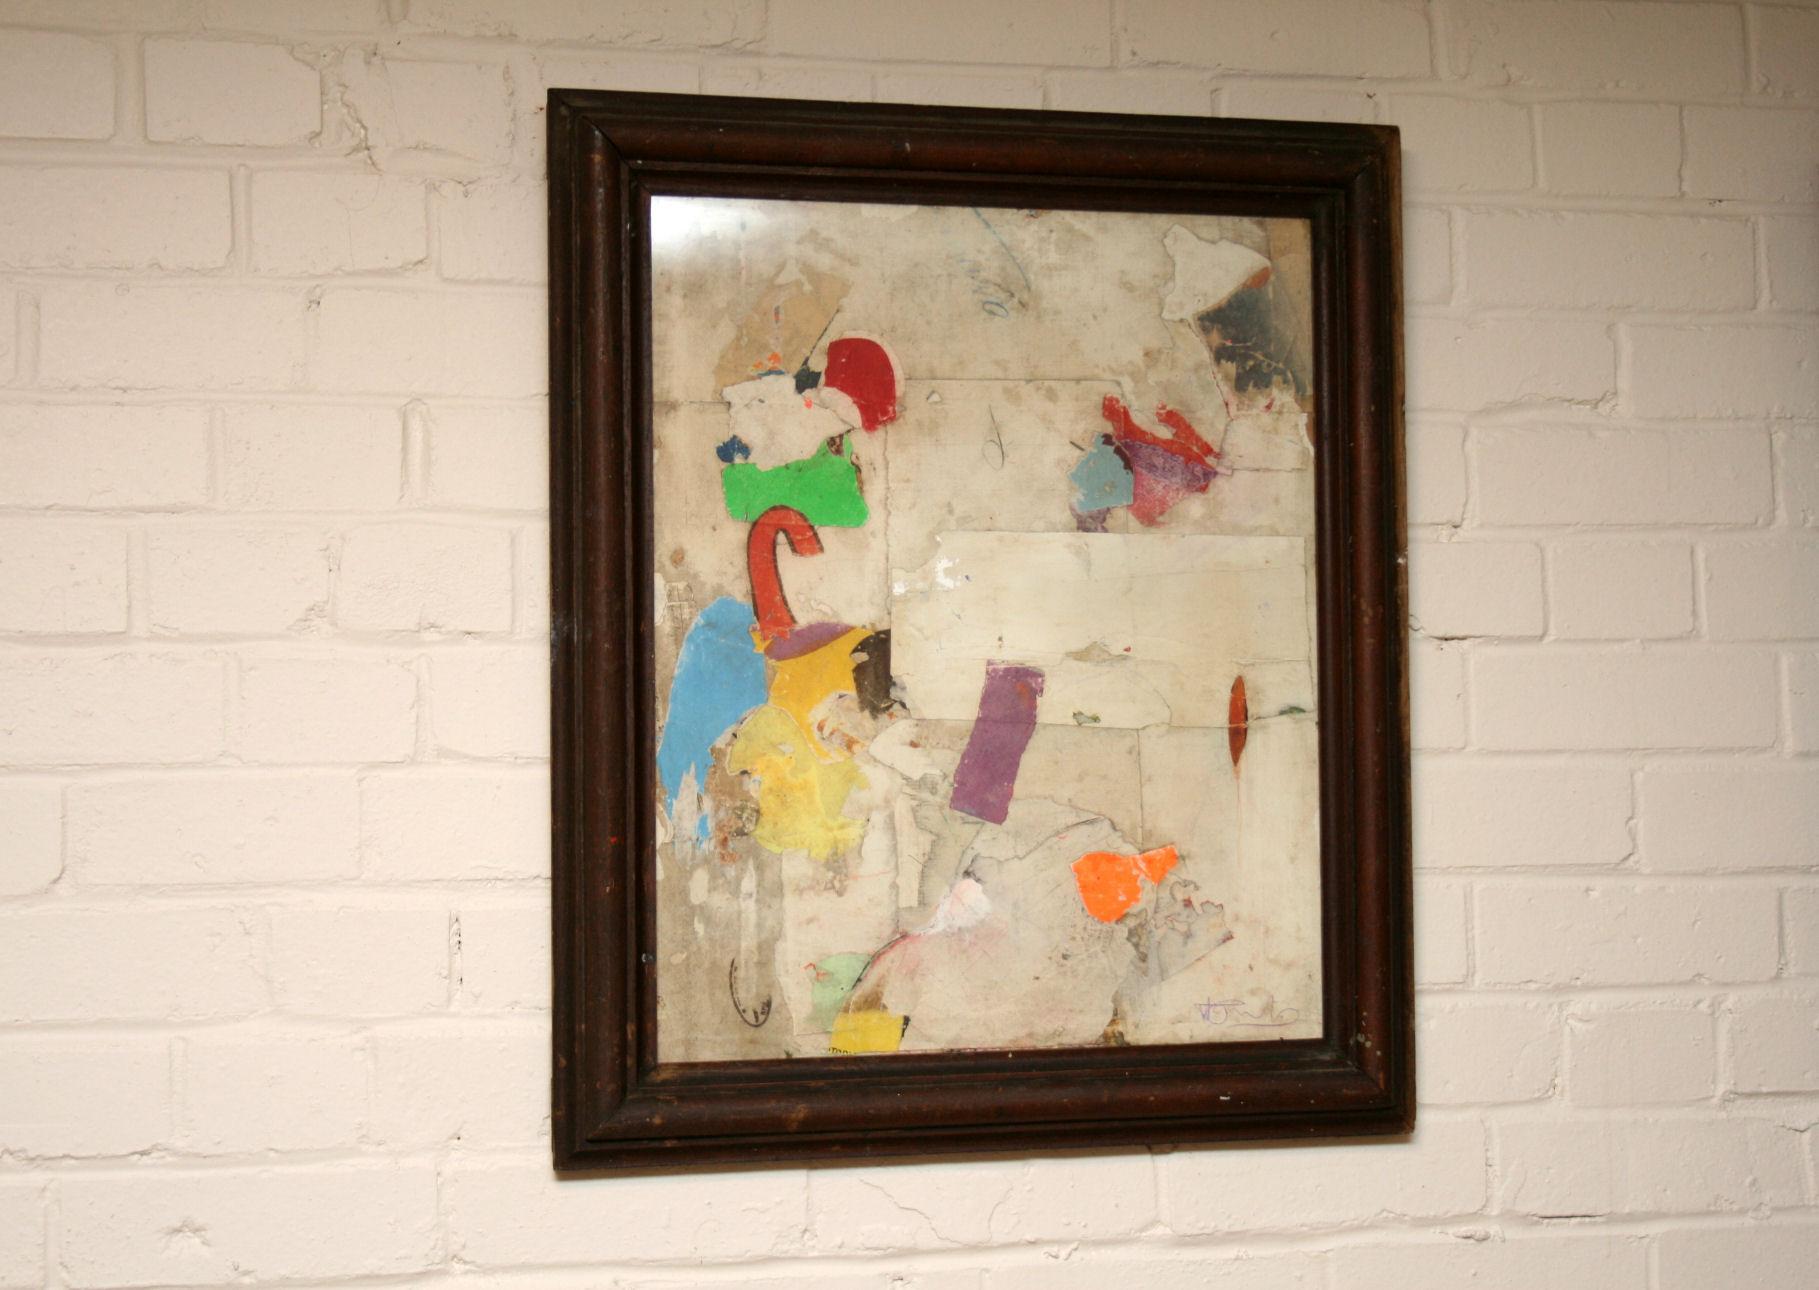 What Remains by Huw Griffith
An abstract collage made up from antique assorted papers.
Size 21.5x 25 inches.
The collage has been placed into an antique frame which has been reworked by Huw and is part of the overall artwork.
 